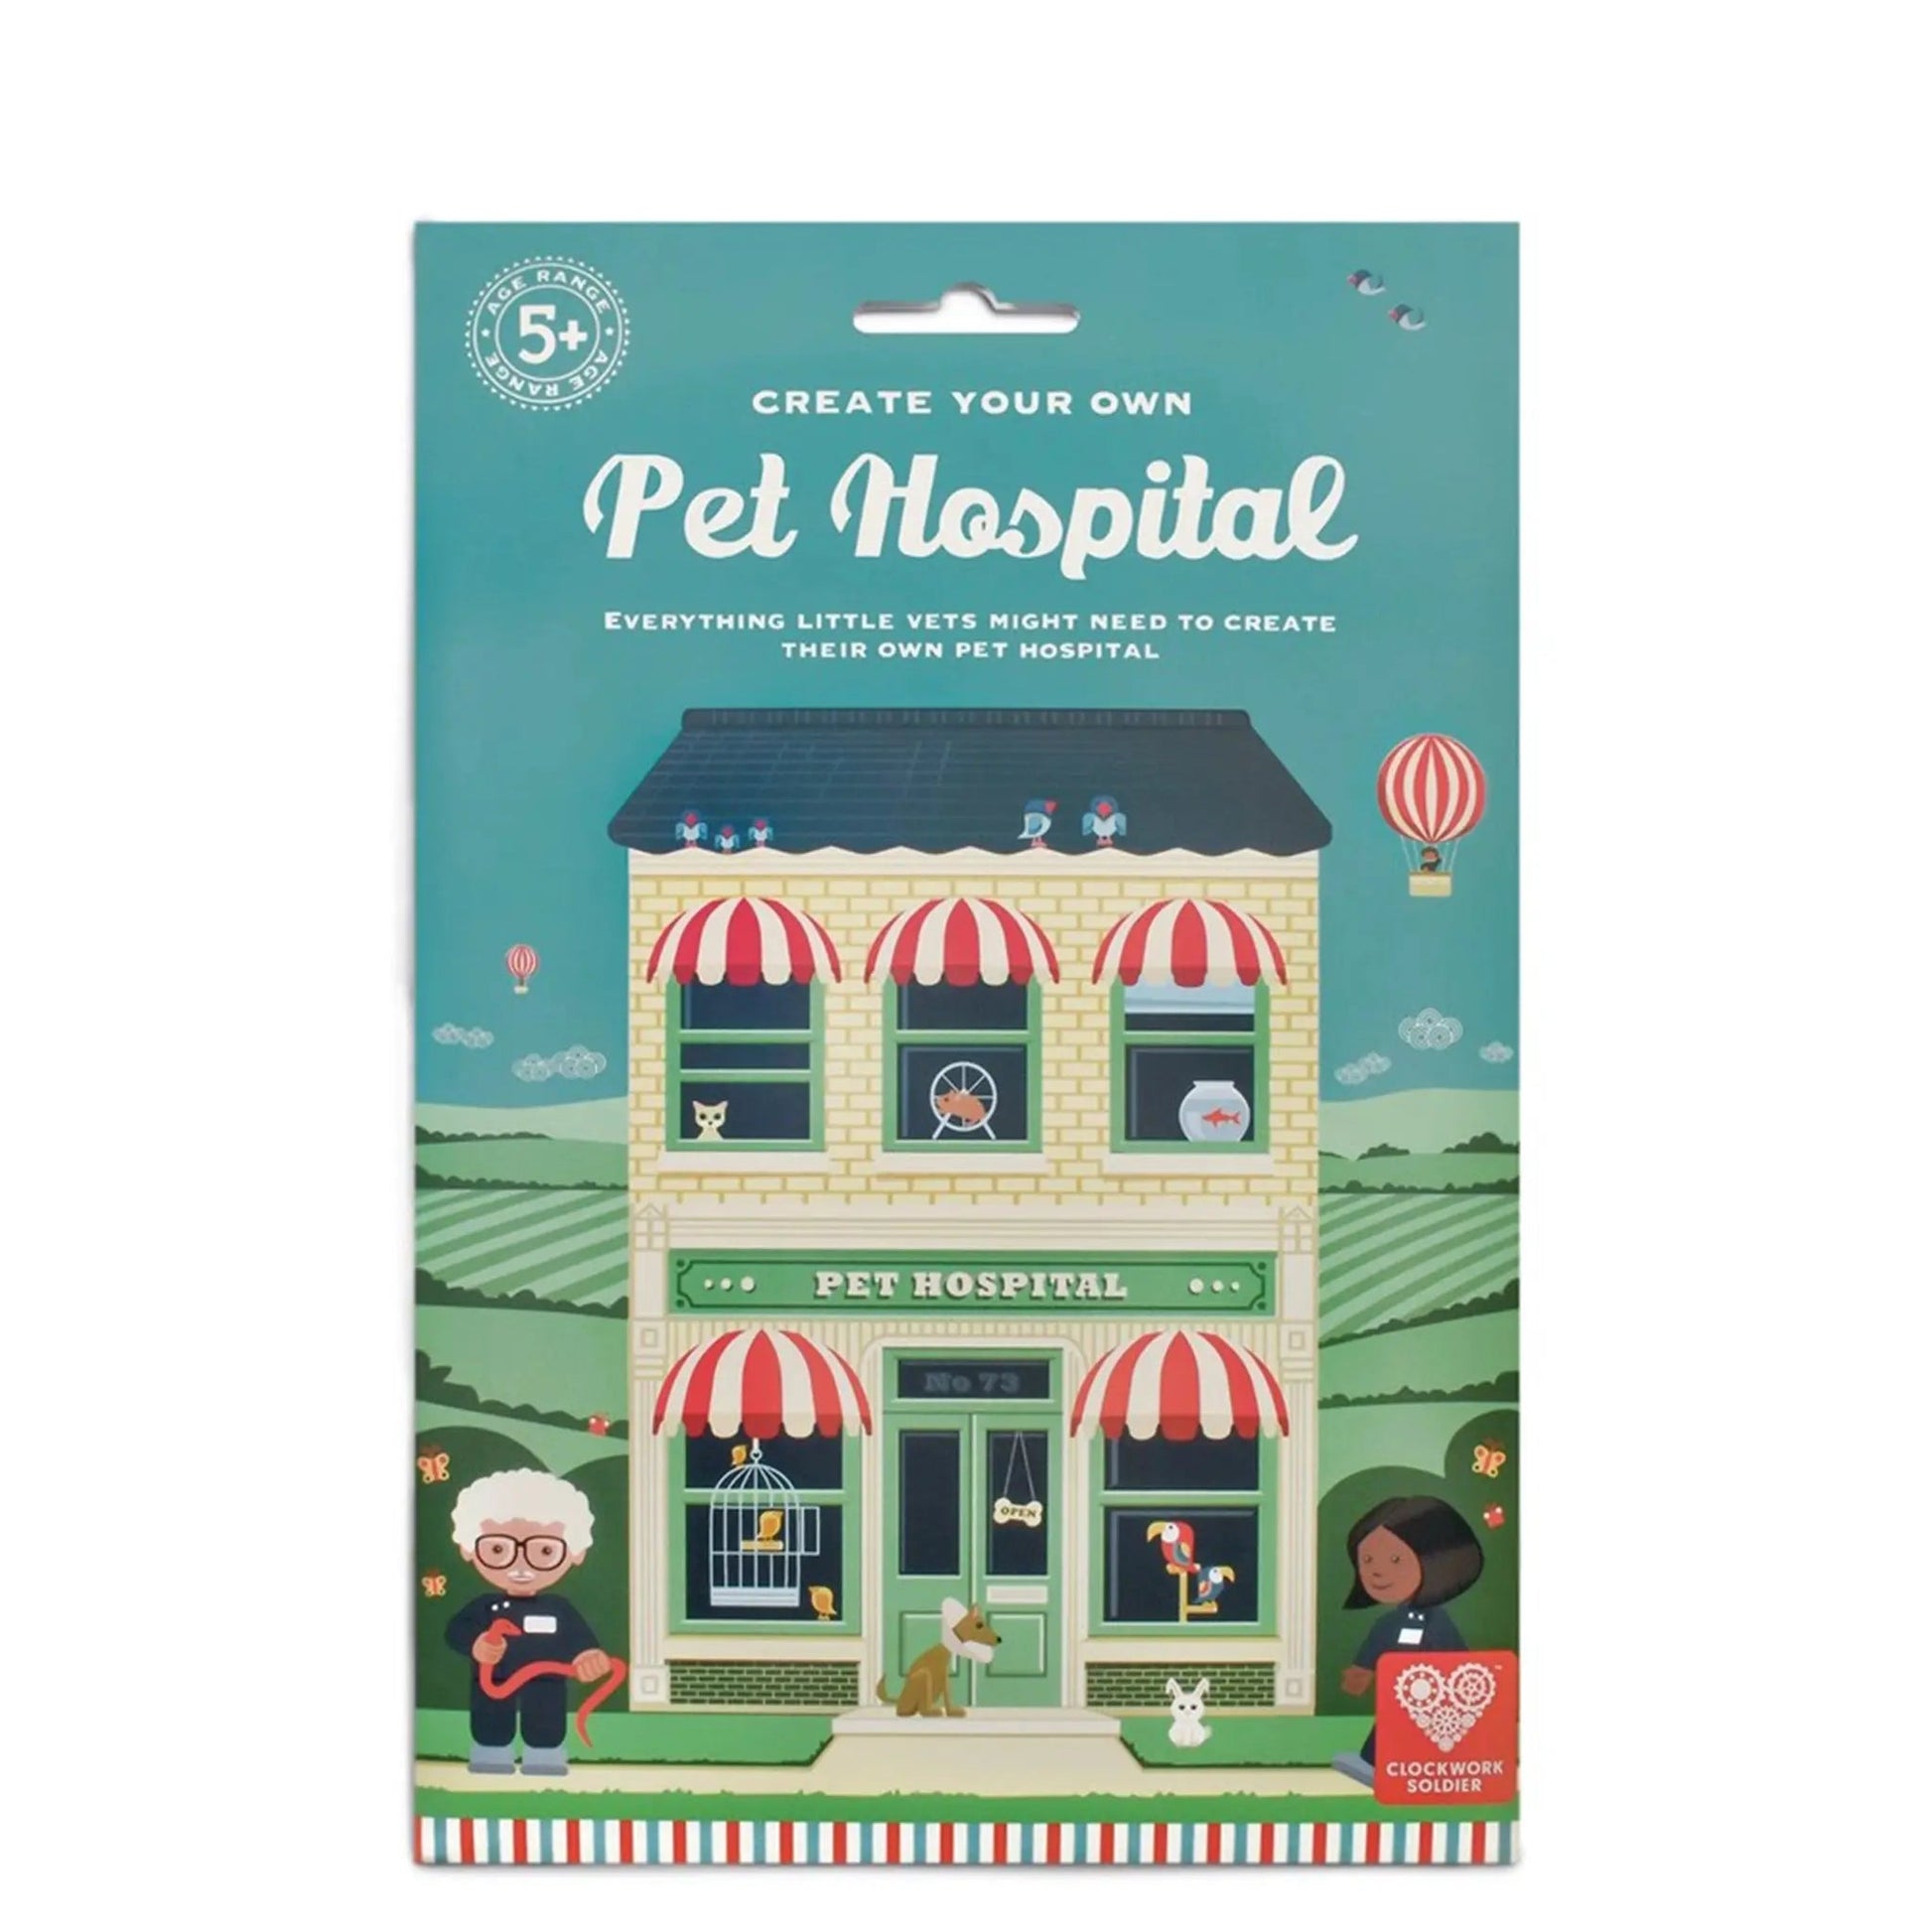 Create your own Pet Hospital - Clockwork Soldier - The Forgotten Toy Shop